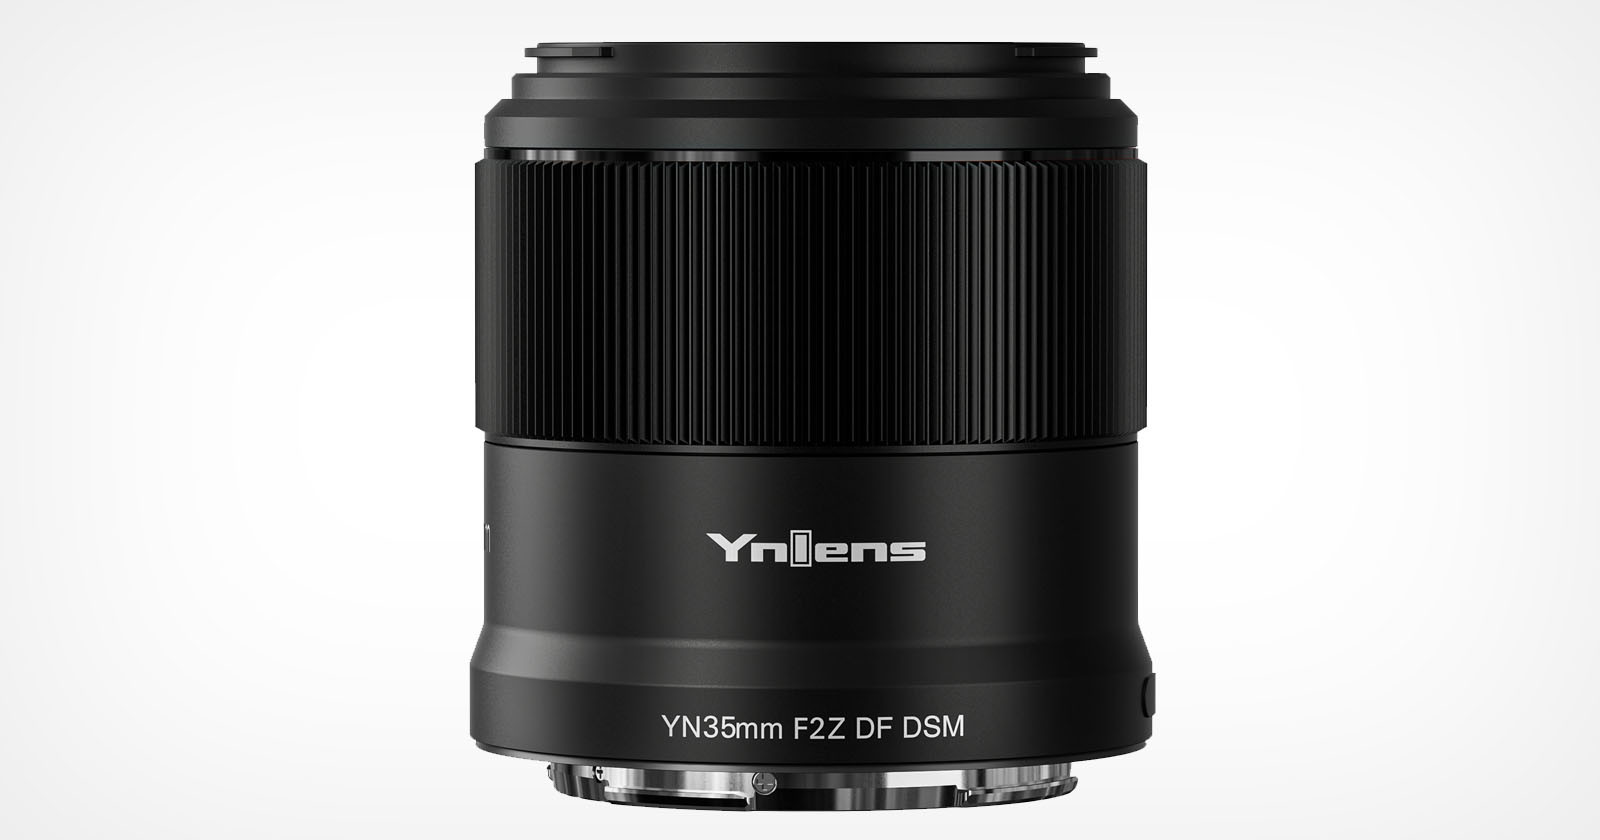 Yongnuos New 35mm f/2 Autofocus Lens for Nikon Z Costs About $250